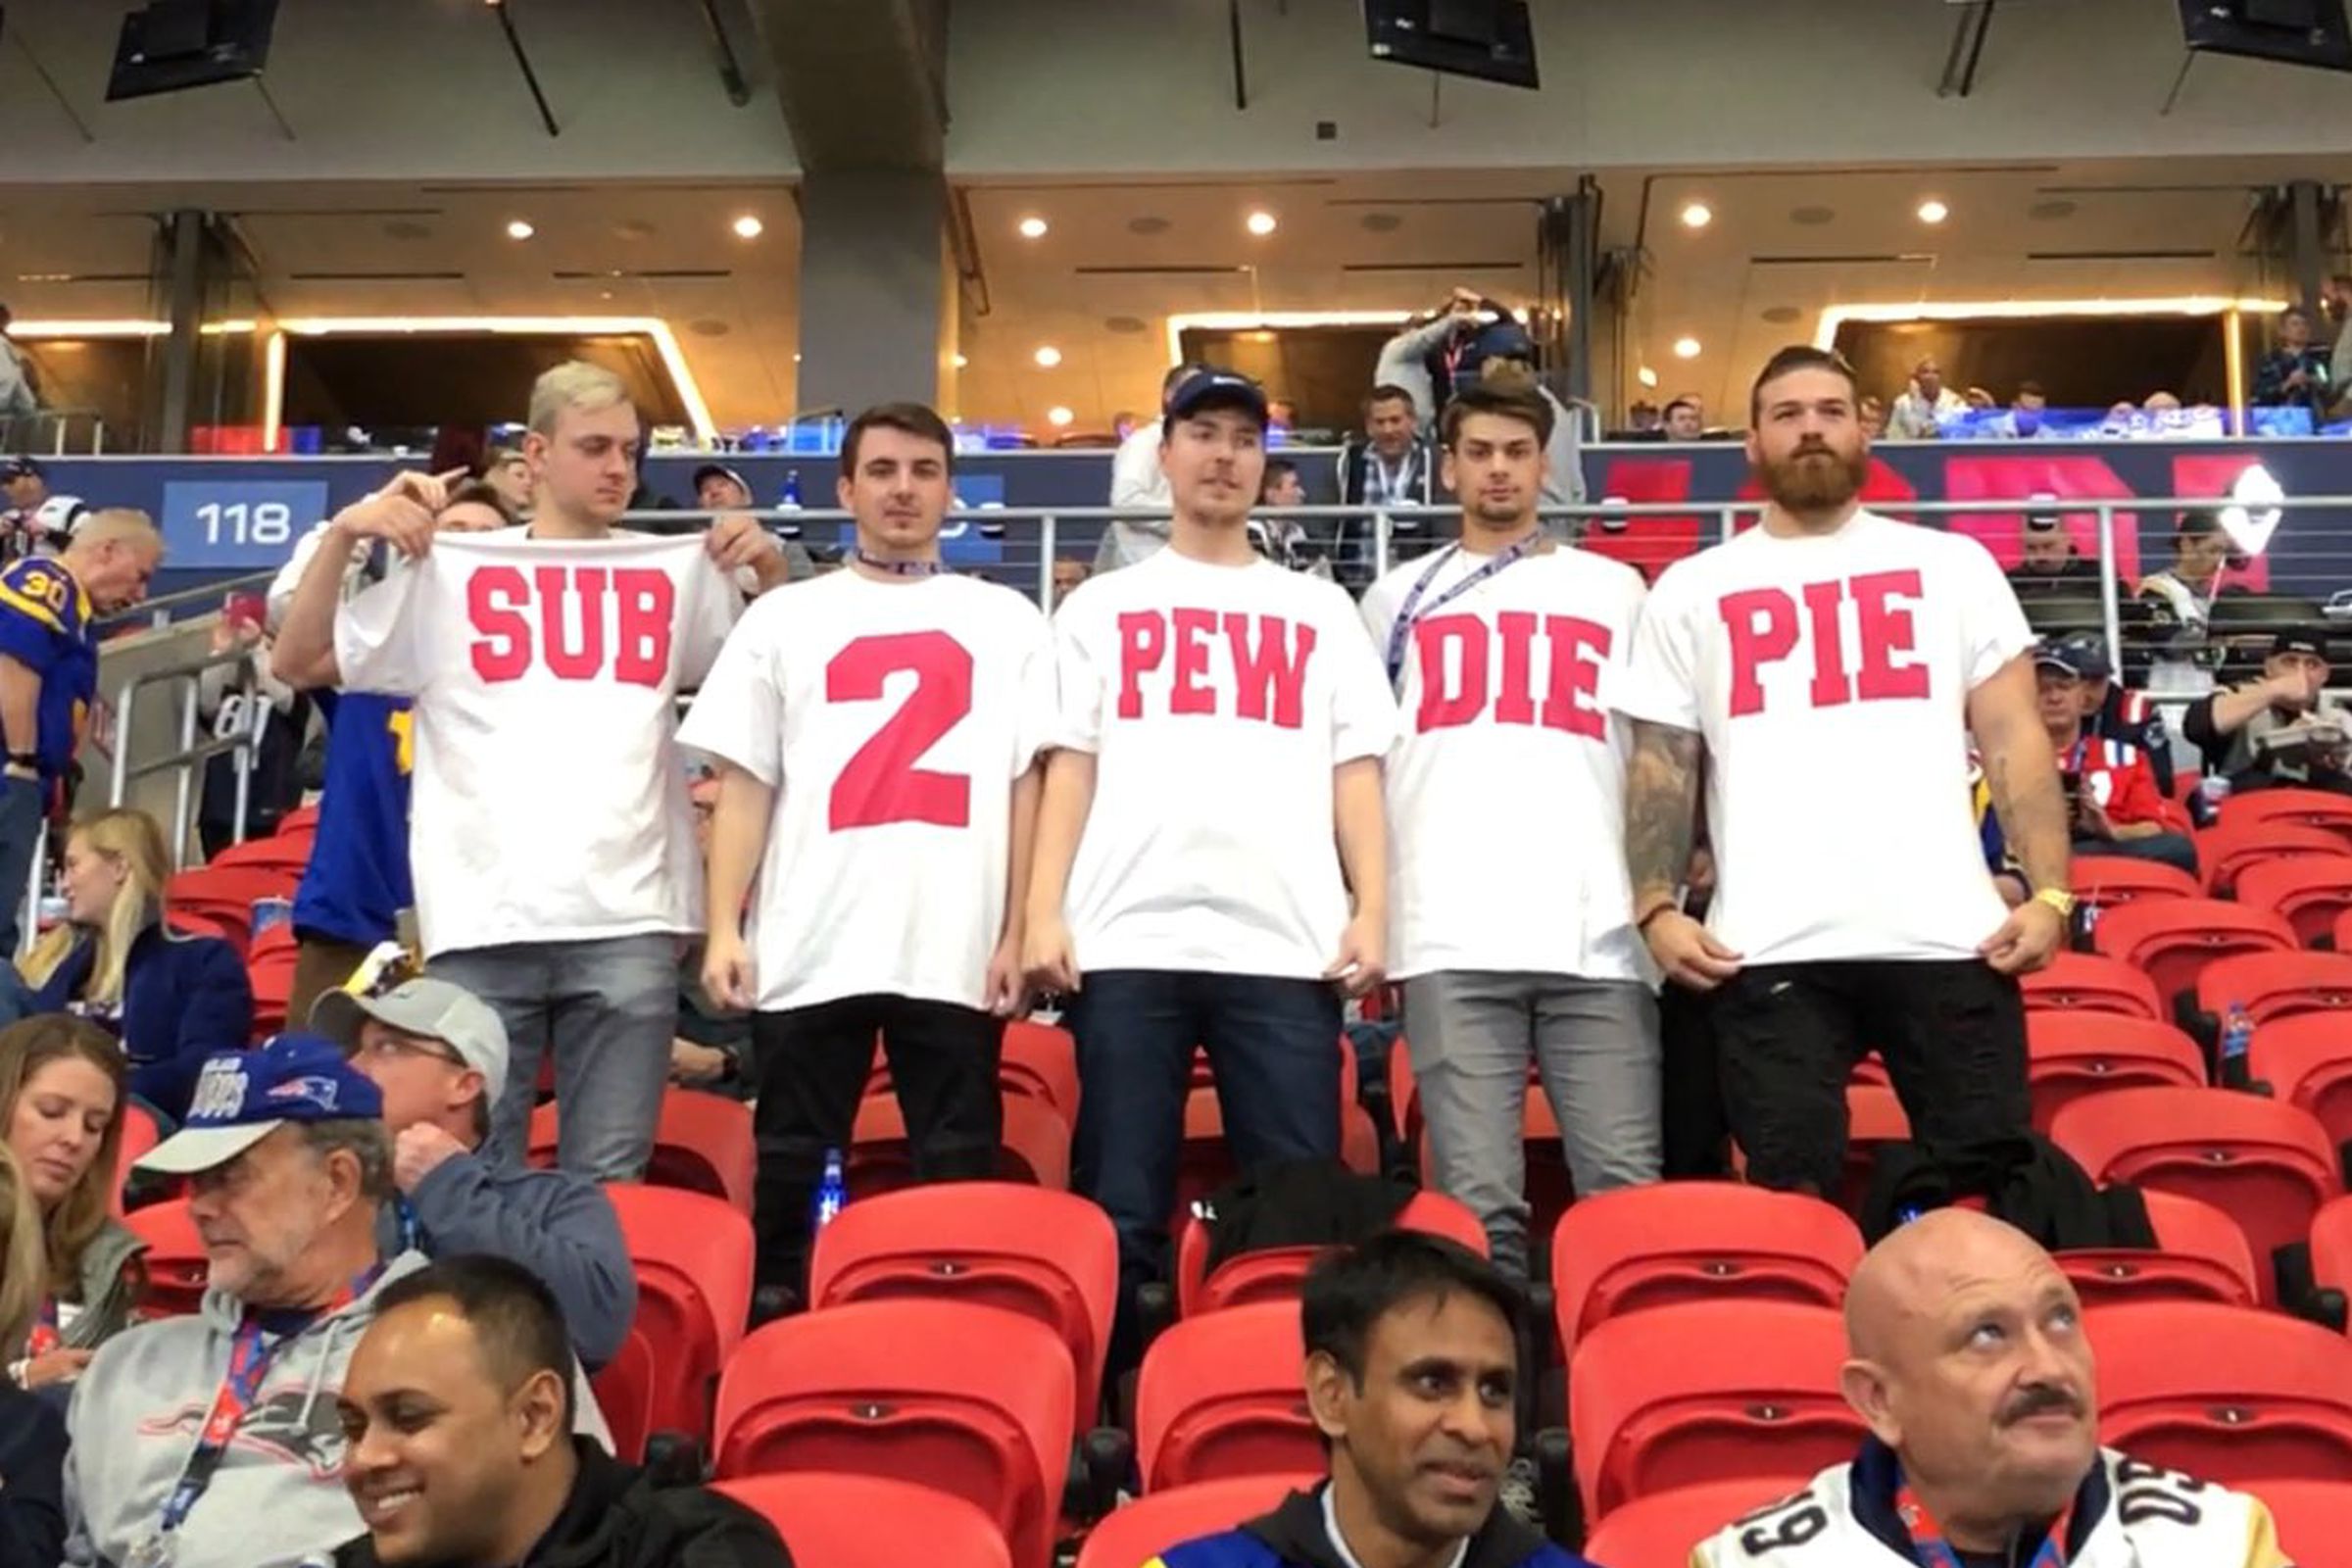 YouTube creator MrBeast and his friends at the Super Bowl. 